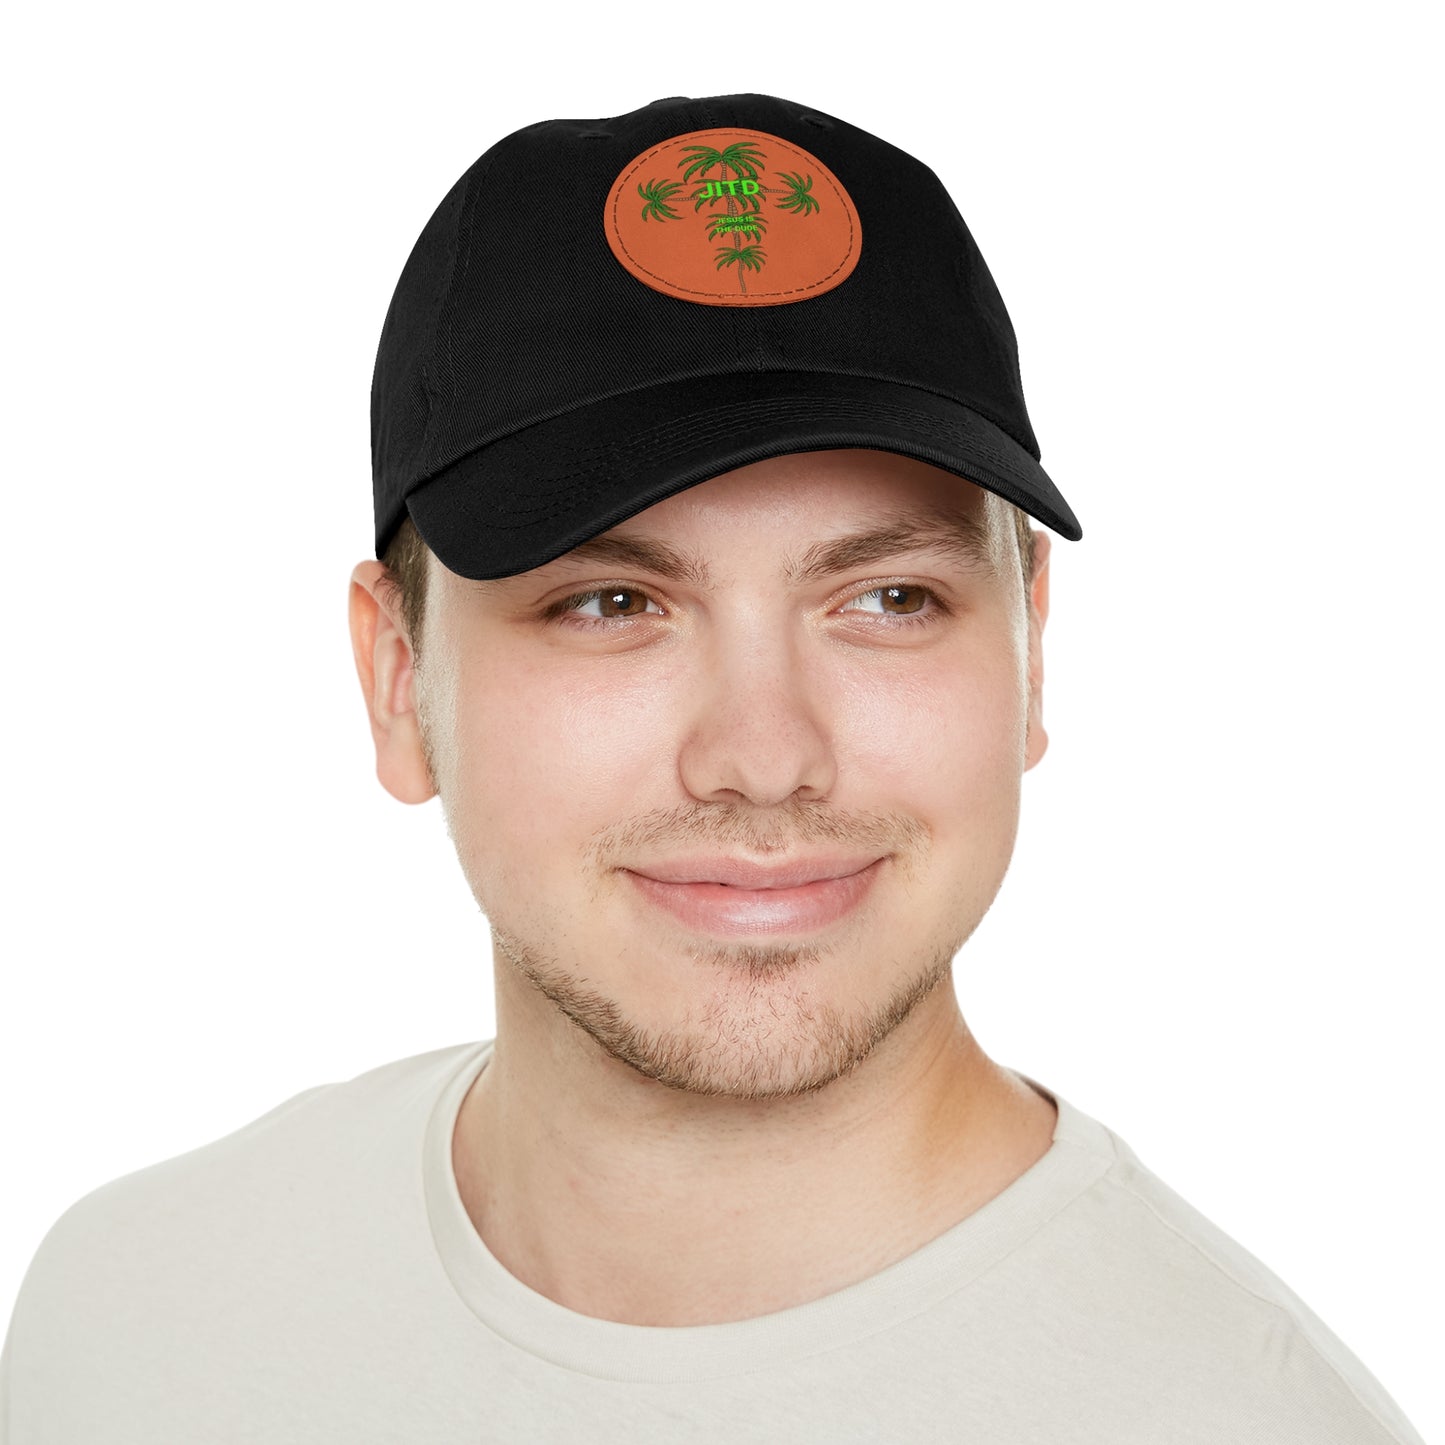 JITD HERB CROSS HAT WITH LEATHER PATCH